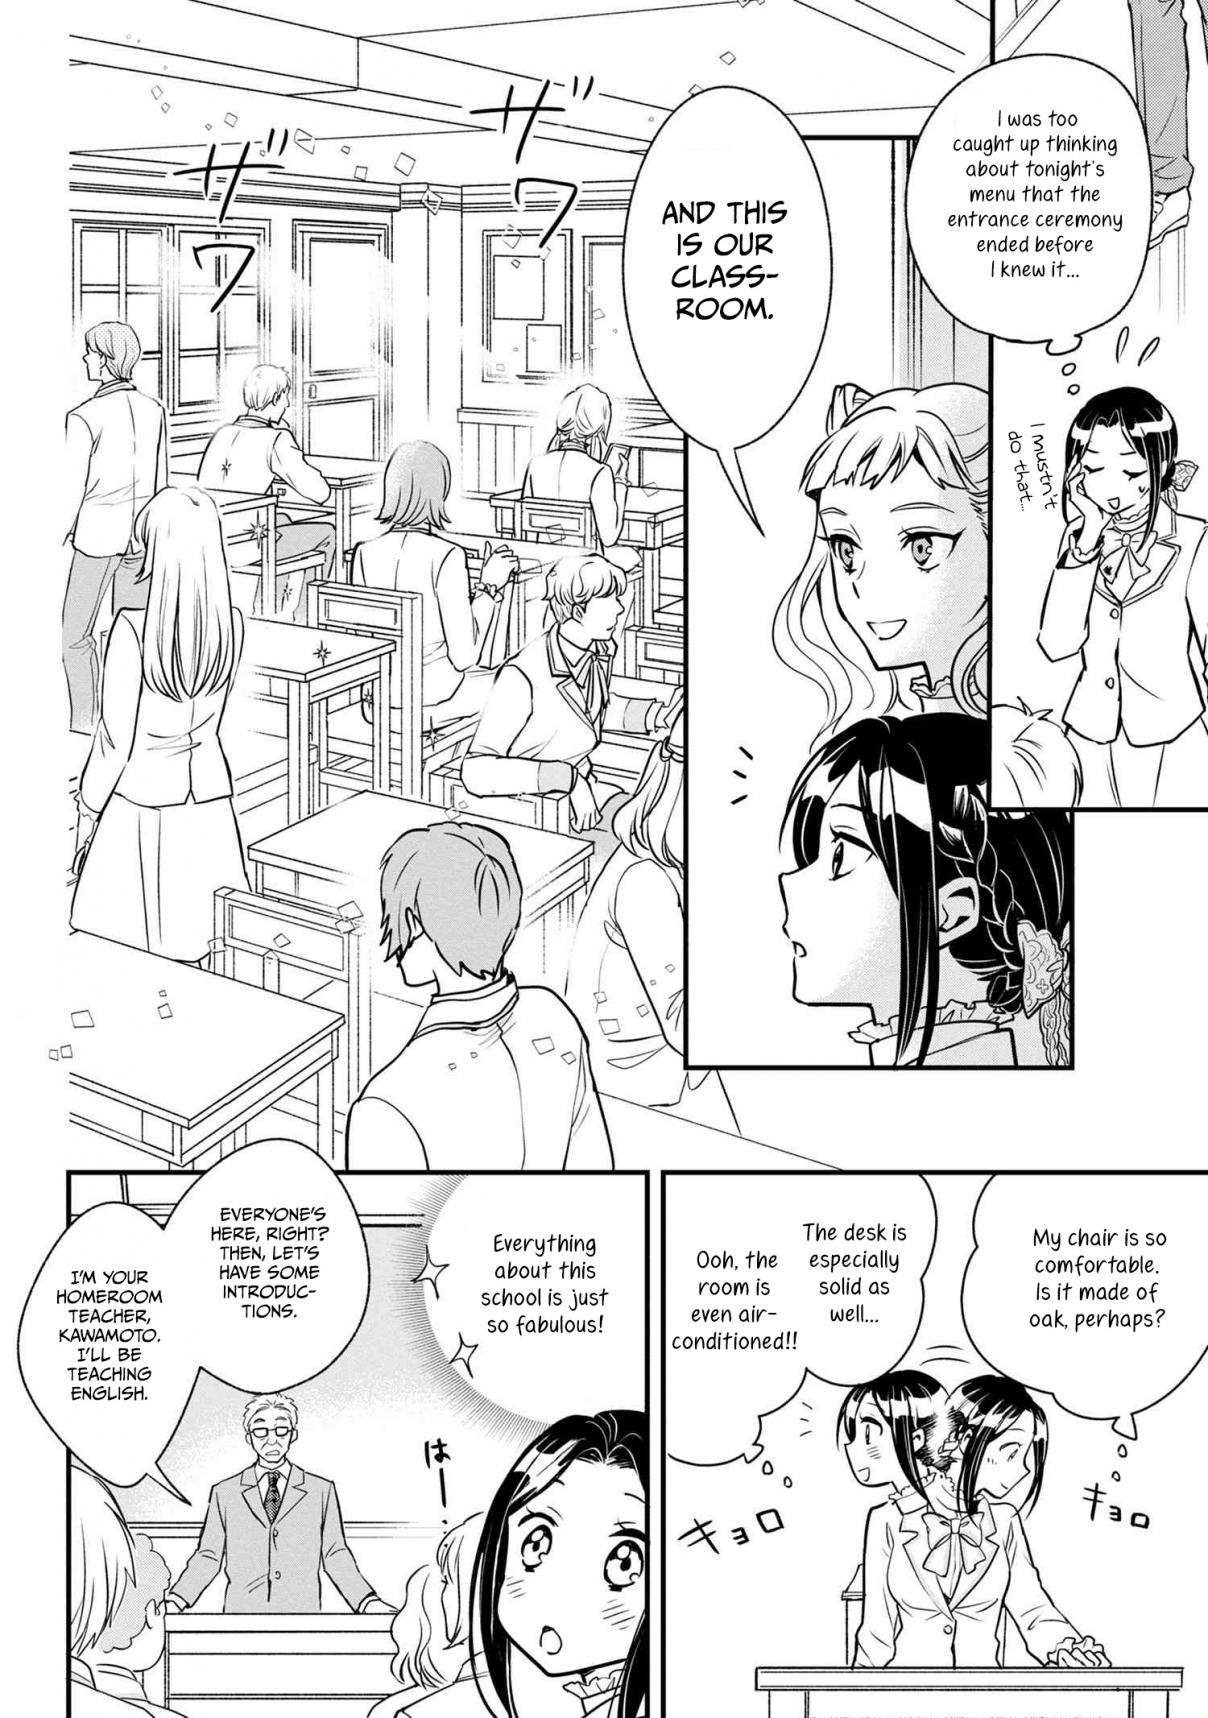 Reiko's Style: Despite Being Mistaken for a Rich Villainess, She's Actually Just Penniless Ch. 1